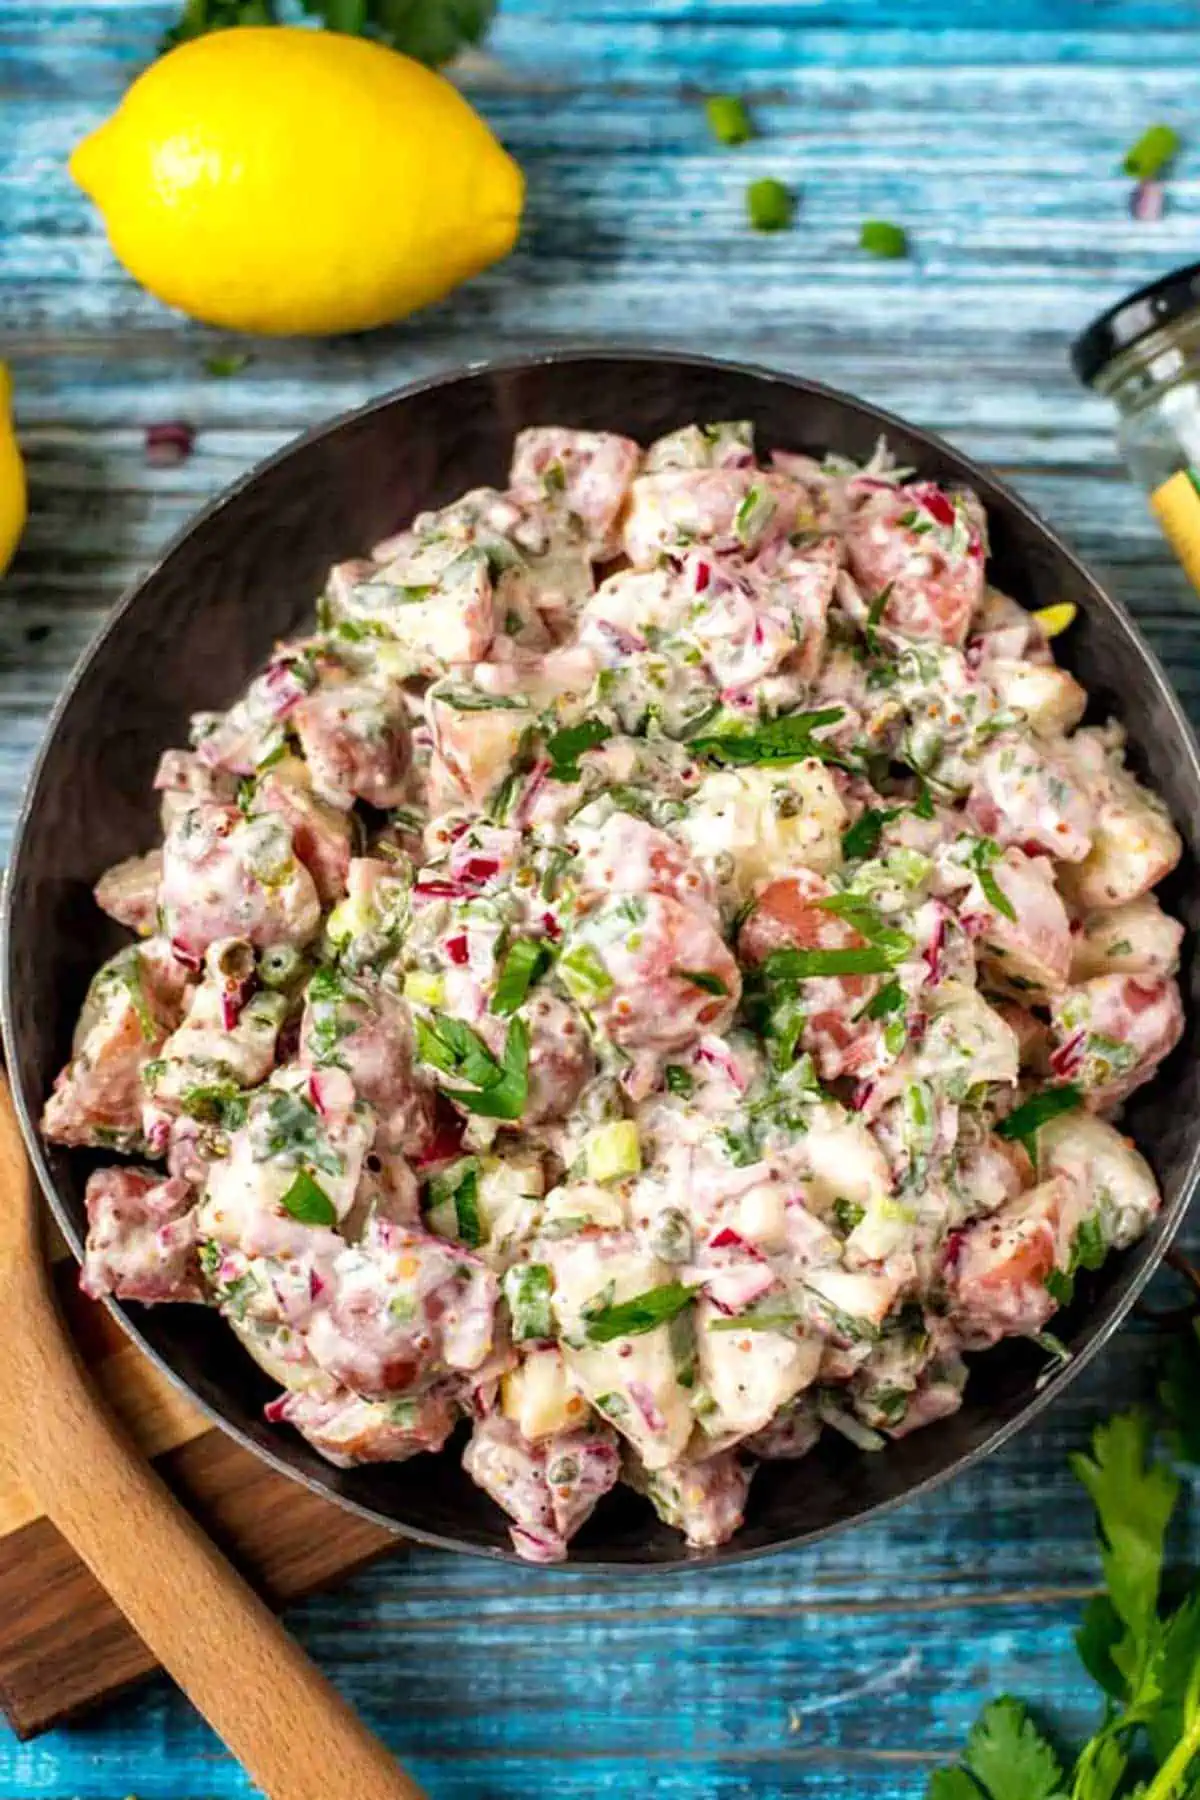 A dark bowl with red skin potato salad surrounded by lemon, herbs, and a wooden serving spoon.